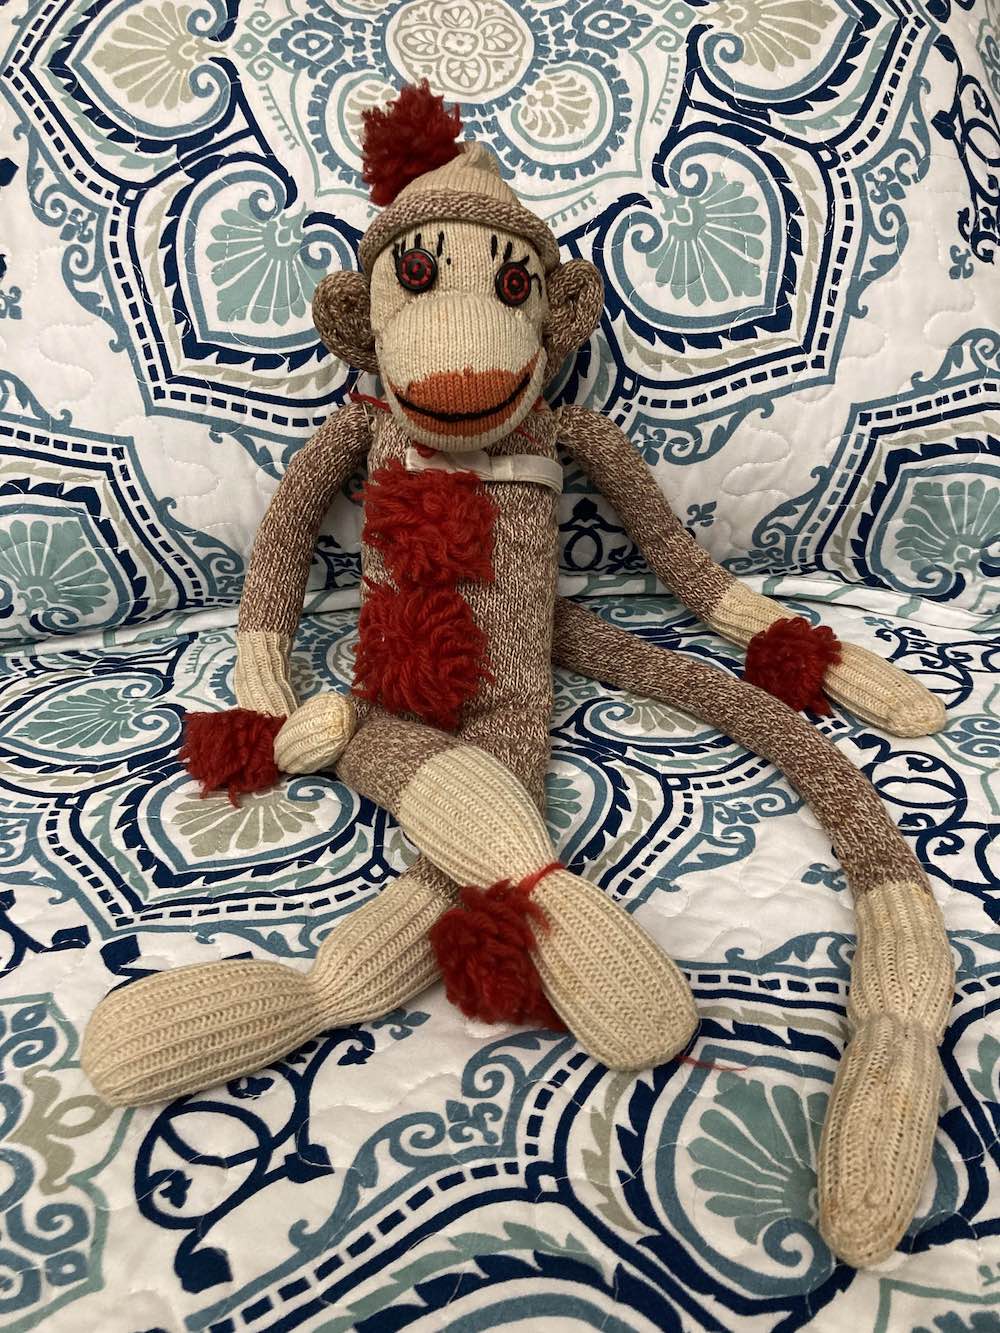 Sock Monkey on a blue and white comforter